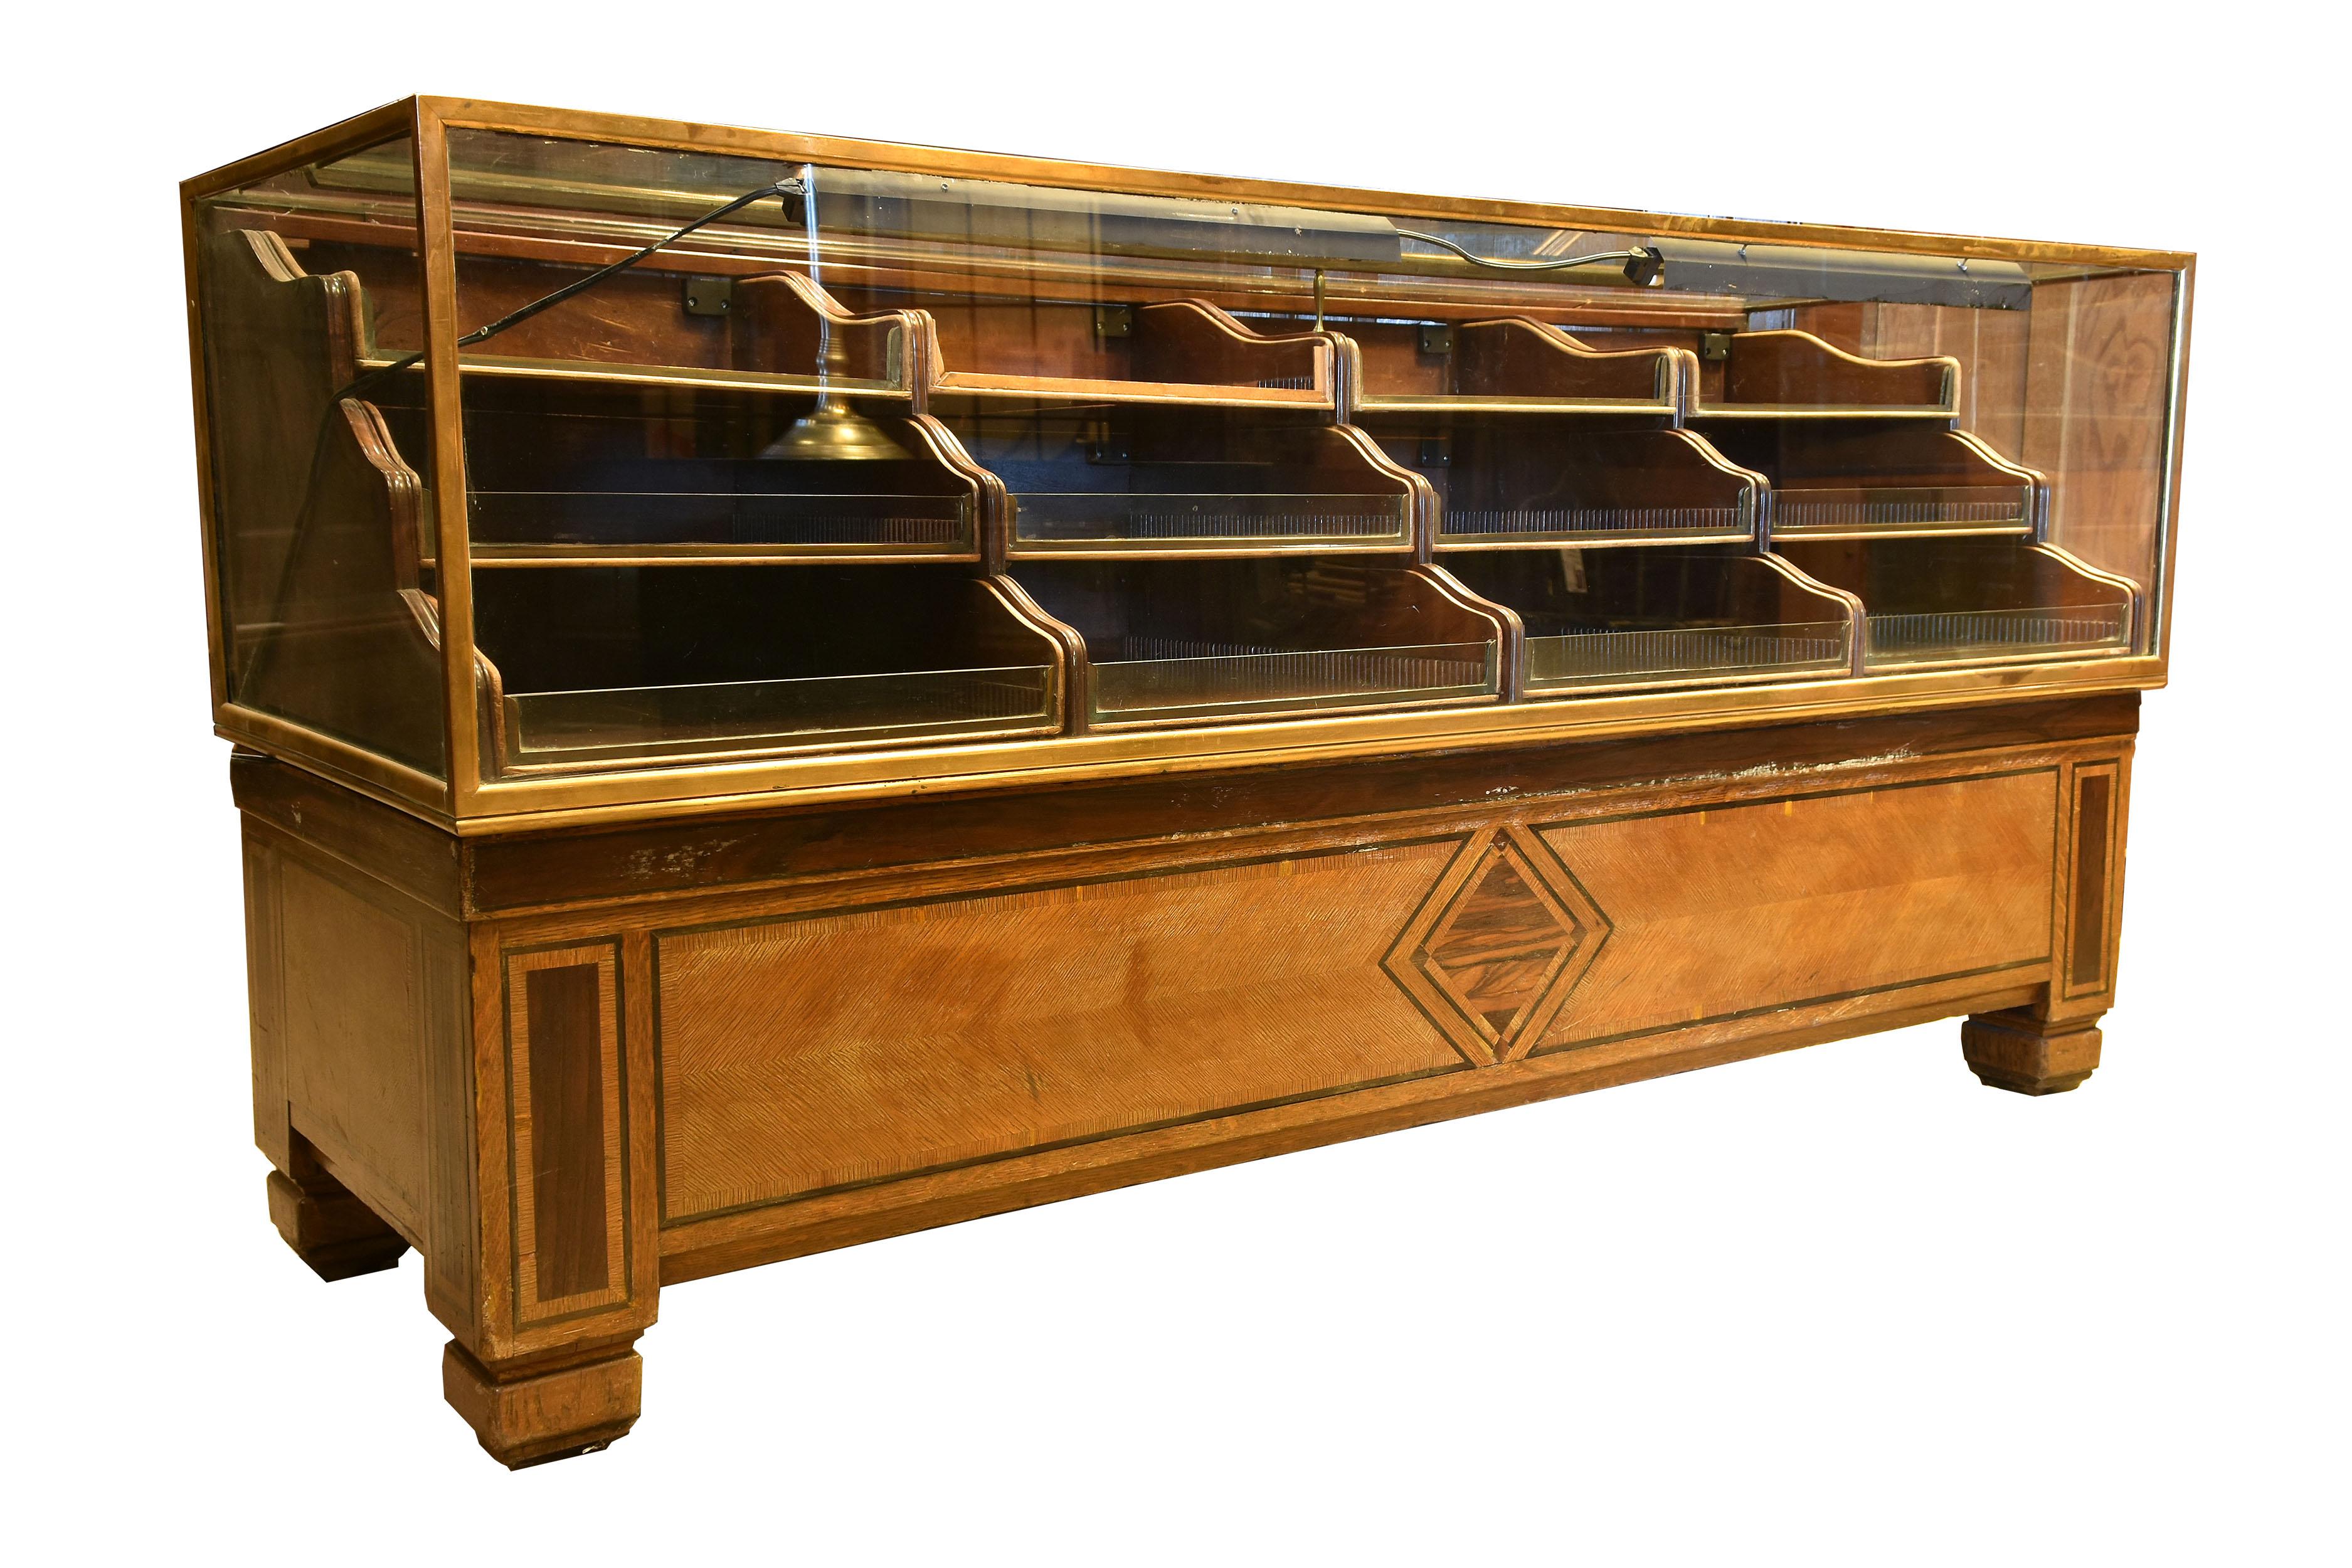 Deco Inlaid Mercantile Display Case with Shelves 3